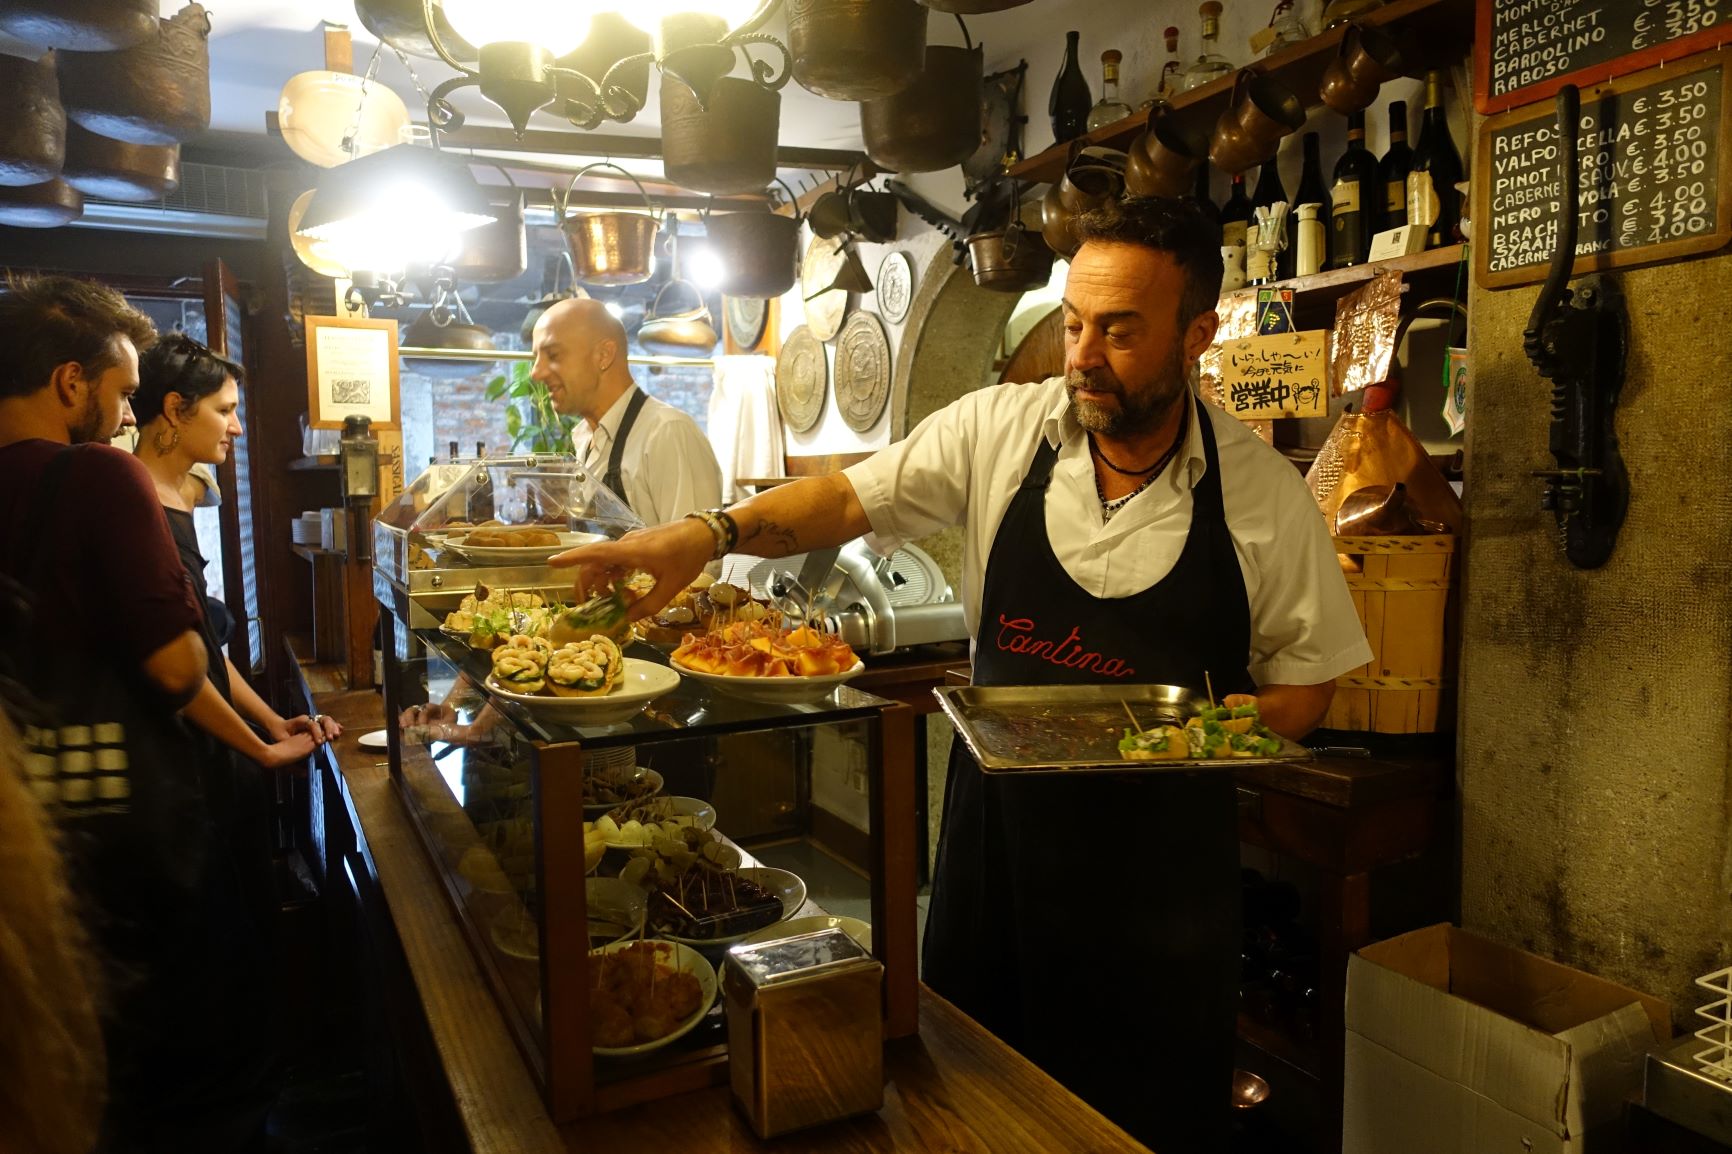 Where to eat in Venice, Italy